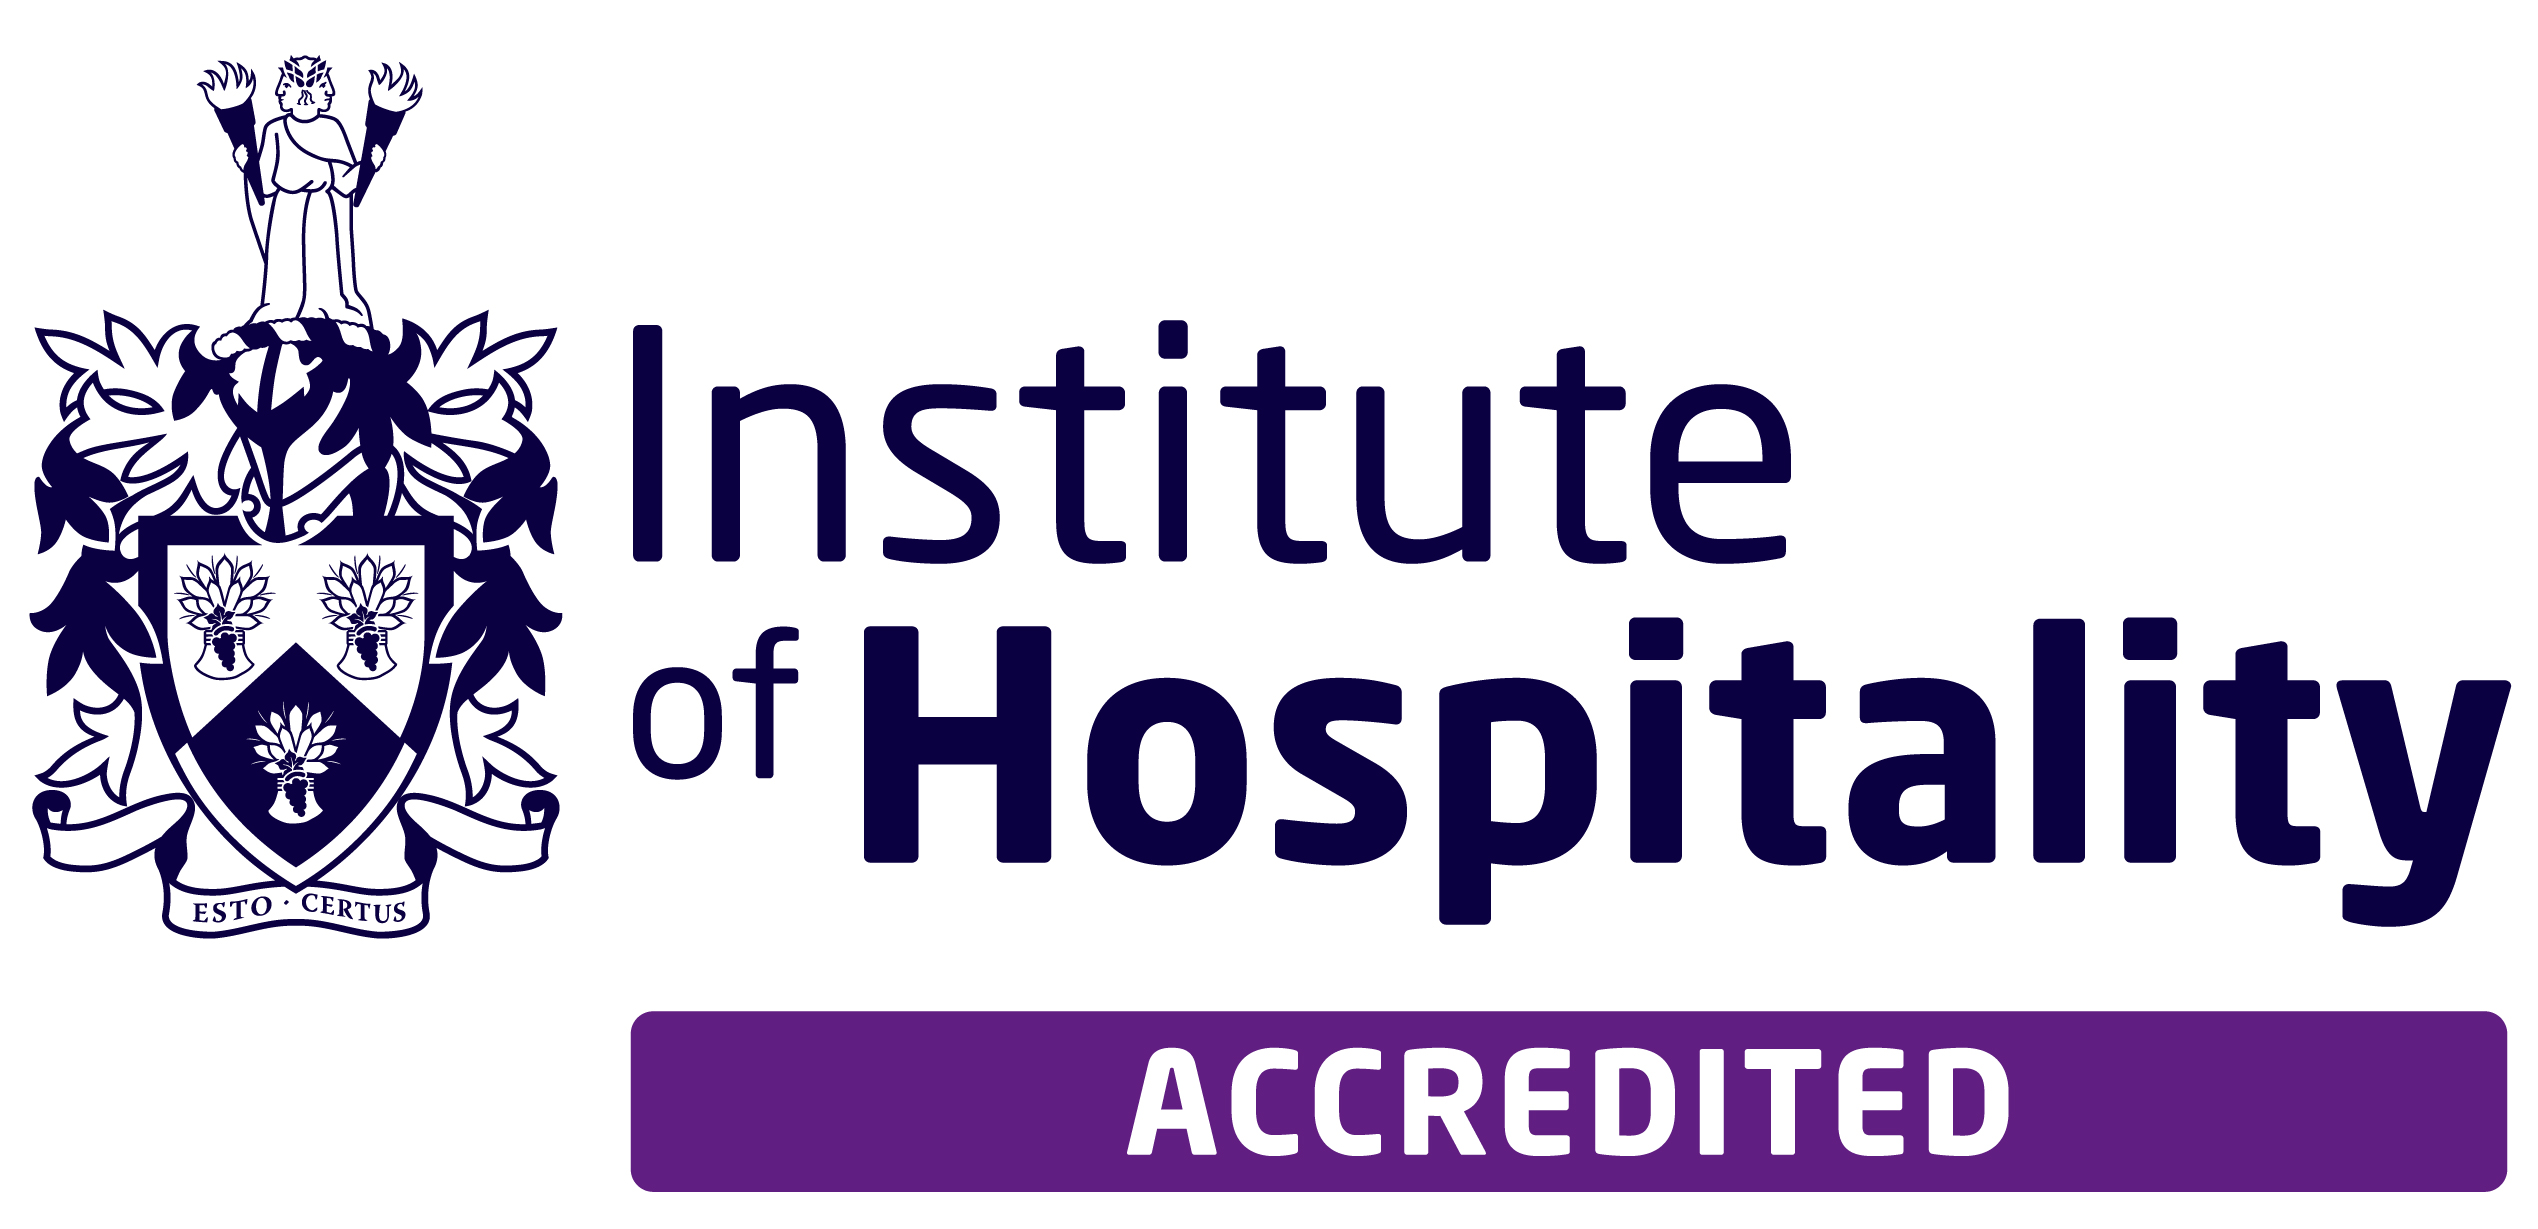 The Institute of Hospitality logo